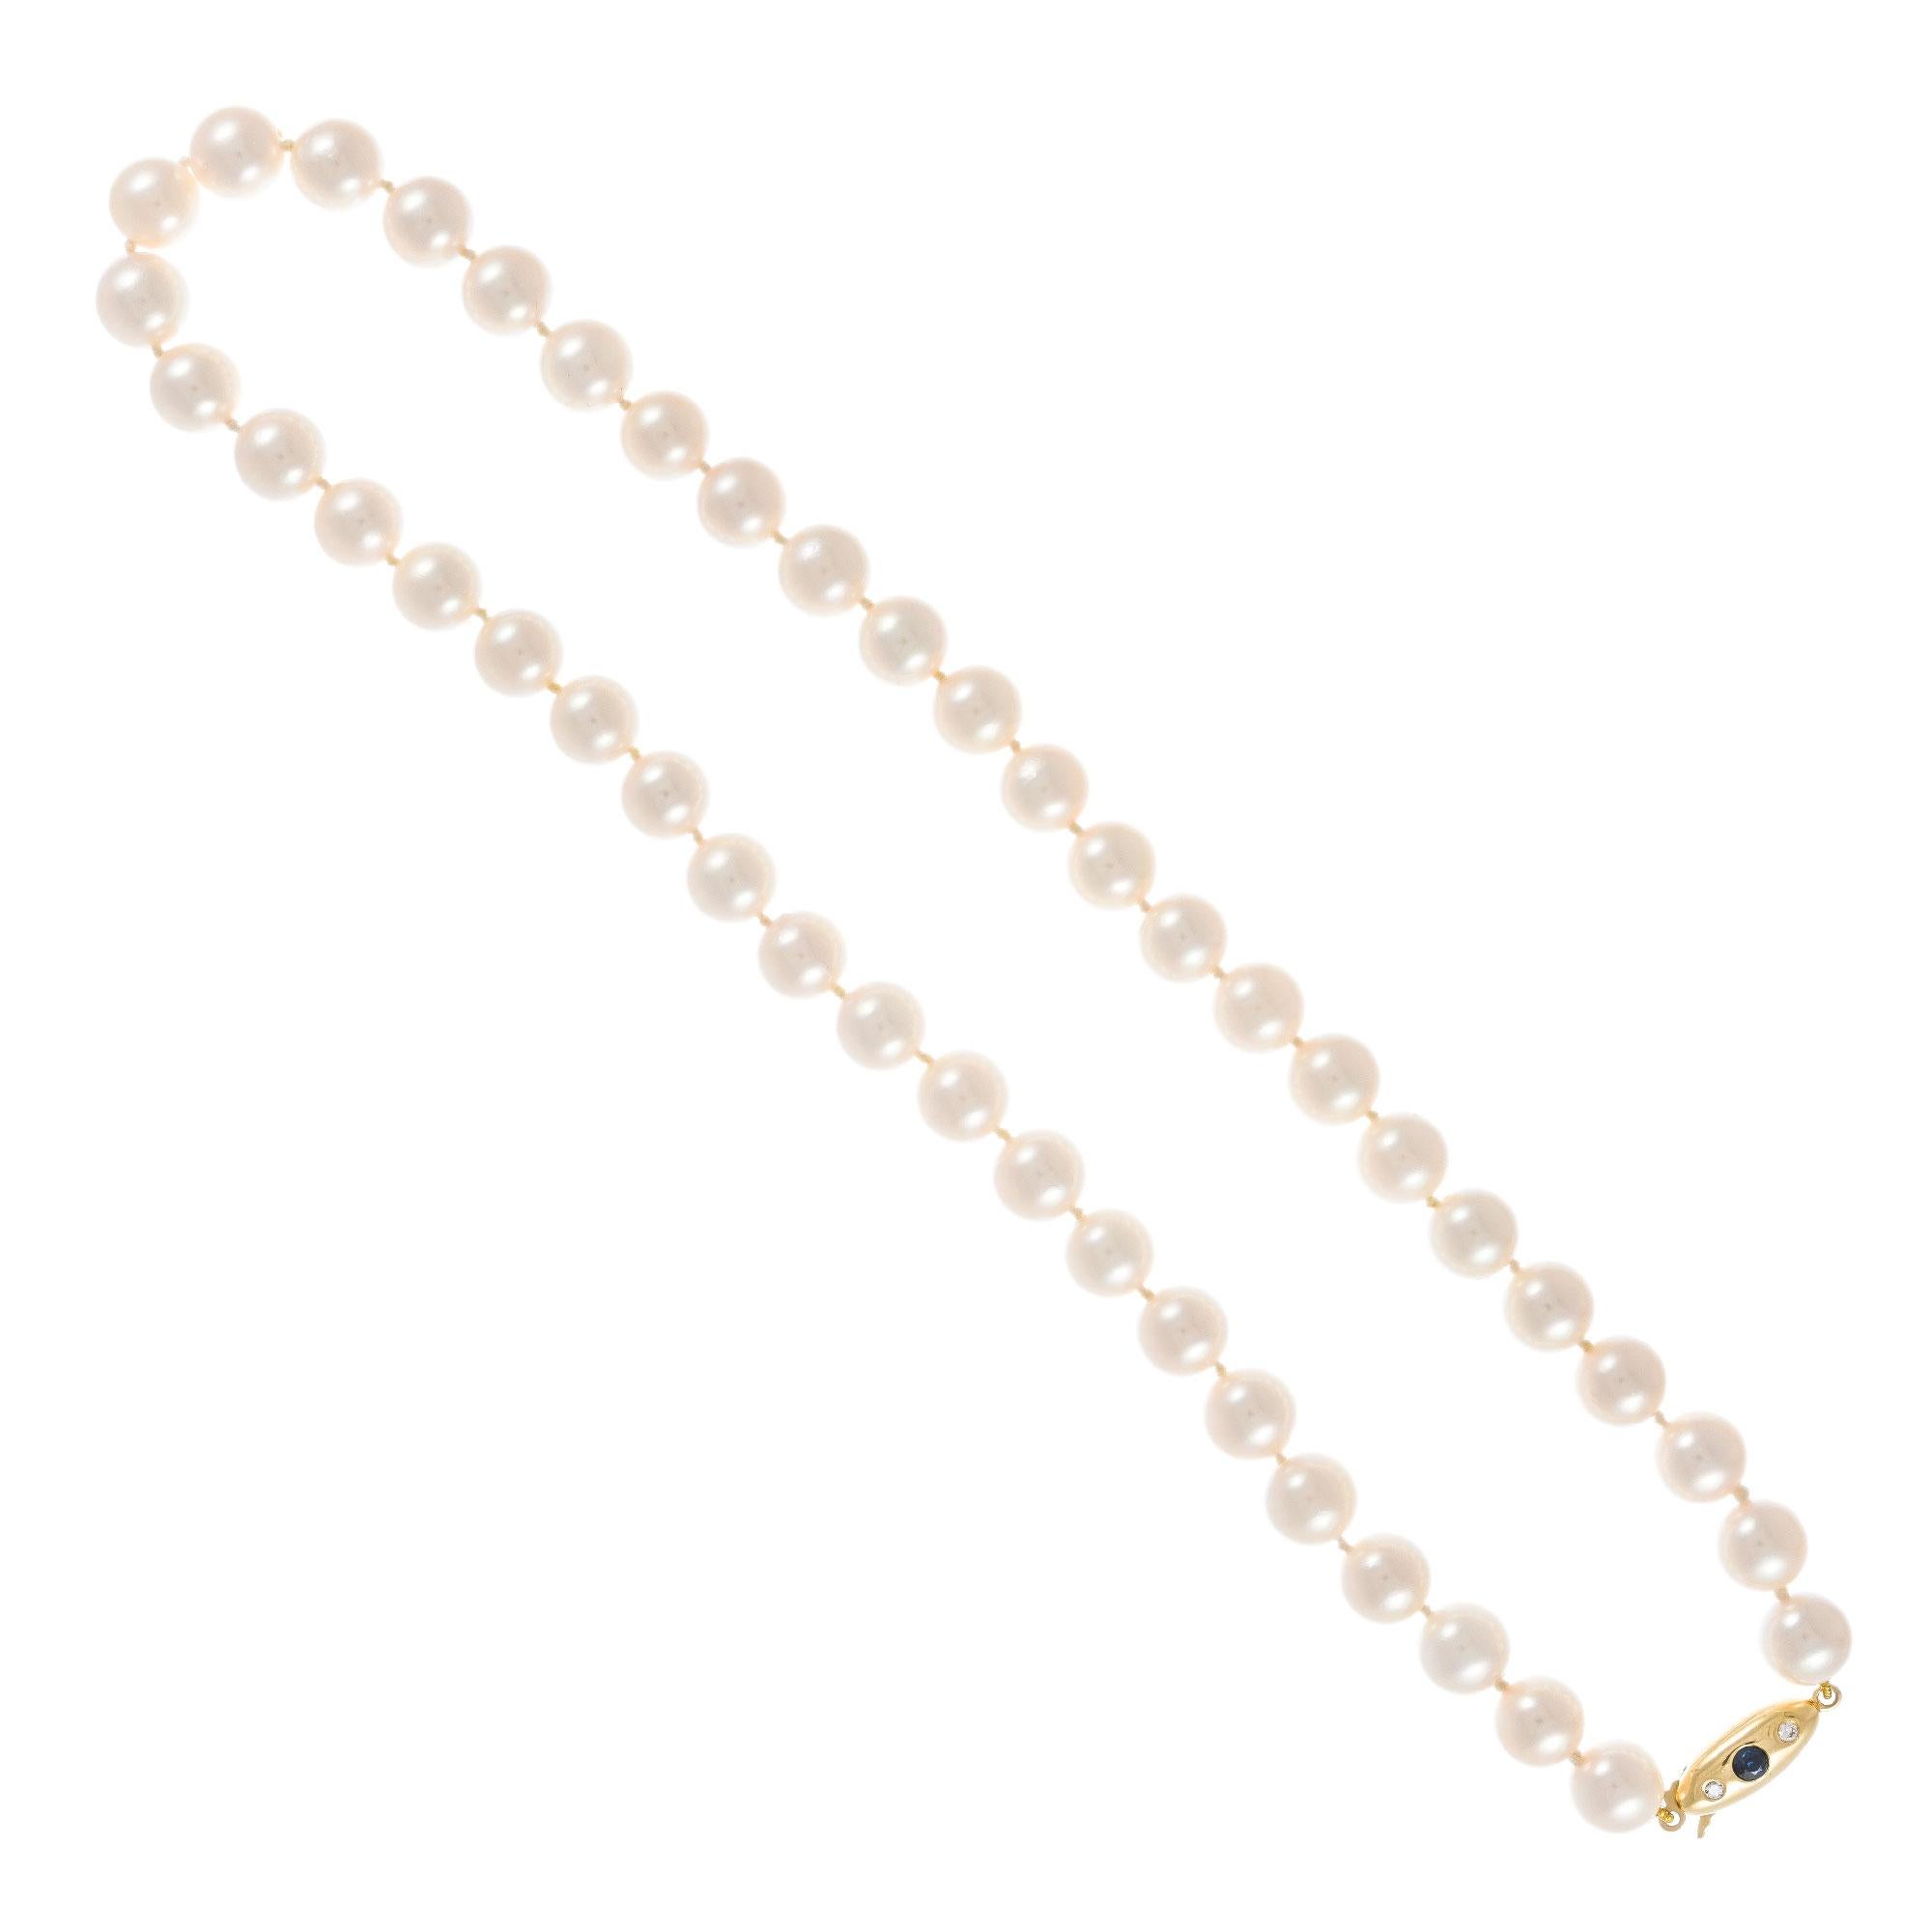 Japanese Akoya cultured pearl 16.5 Inch necklace. 8-8.25 millimeter white pearls with rose overtones. Excellent luster. 18k yellow gold clasp with one round sapphire and two round brilliant cut diamonds.

44 cultured white/rose hue pearls, 8-8.5mm
1